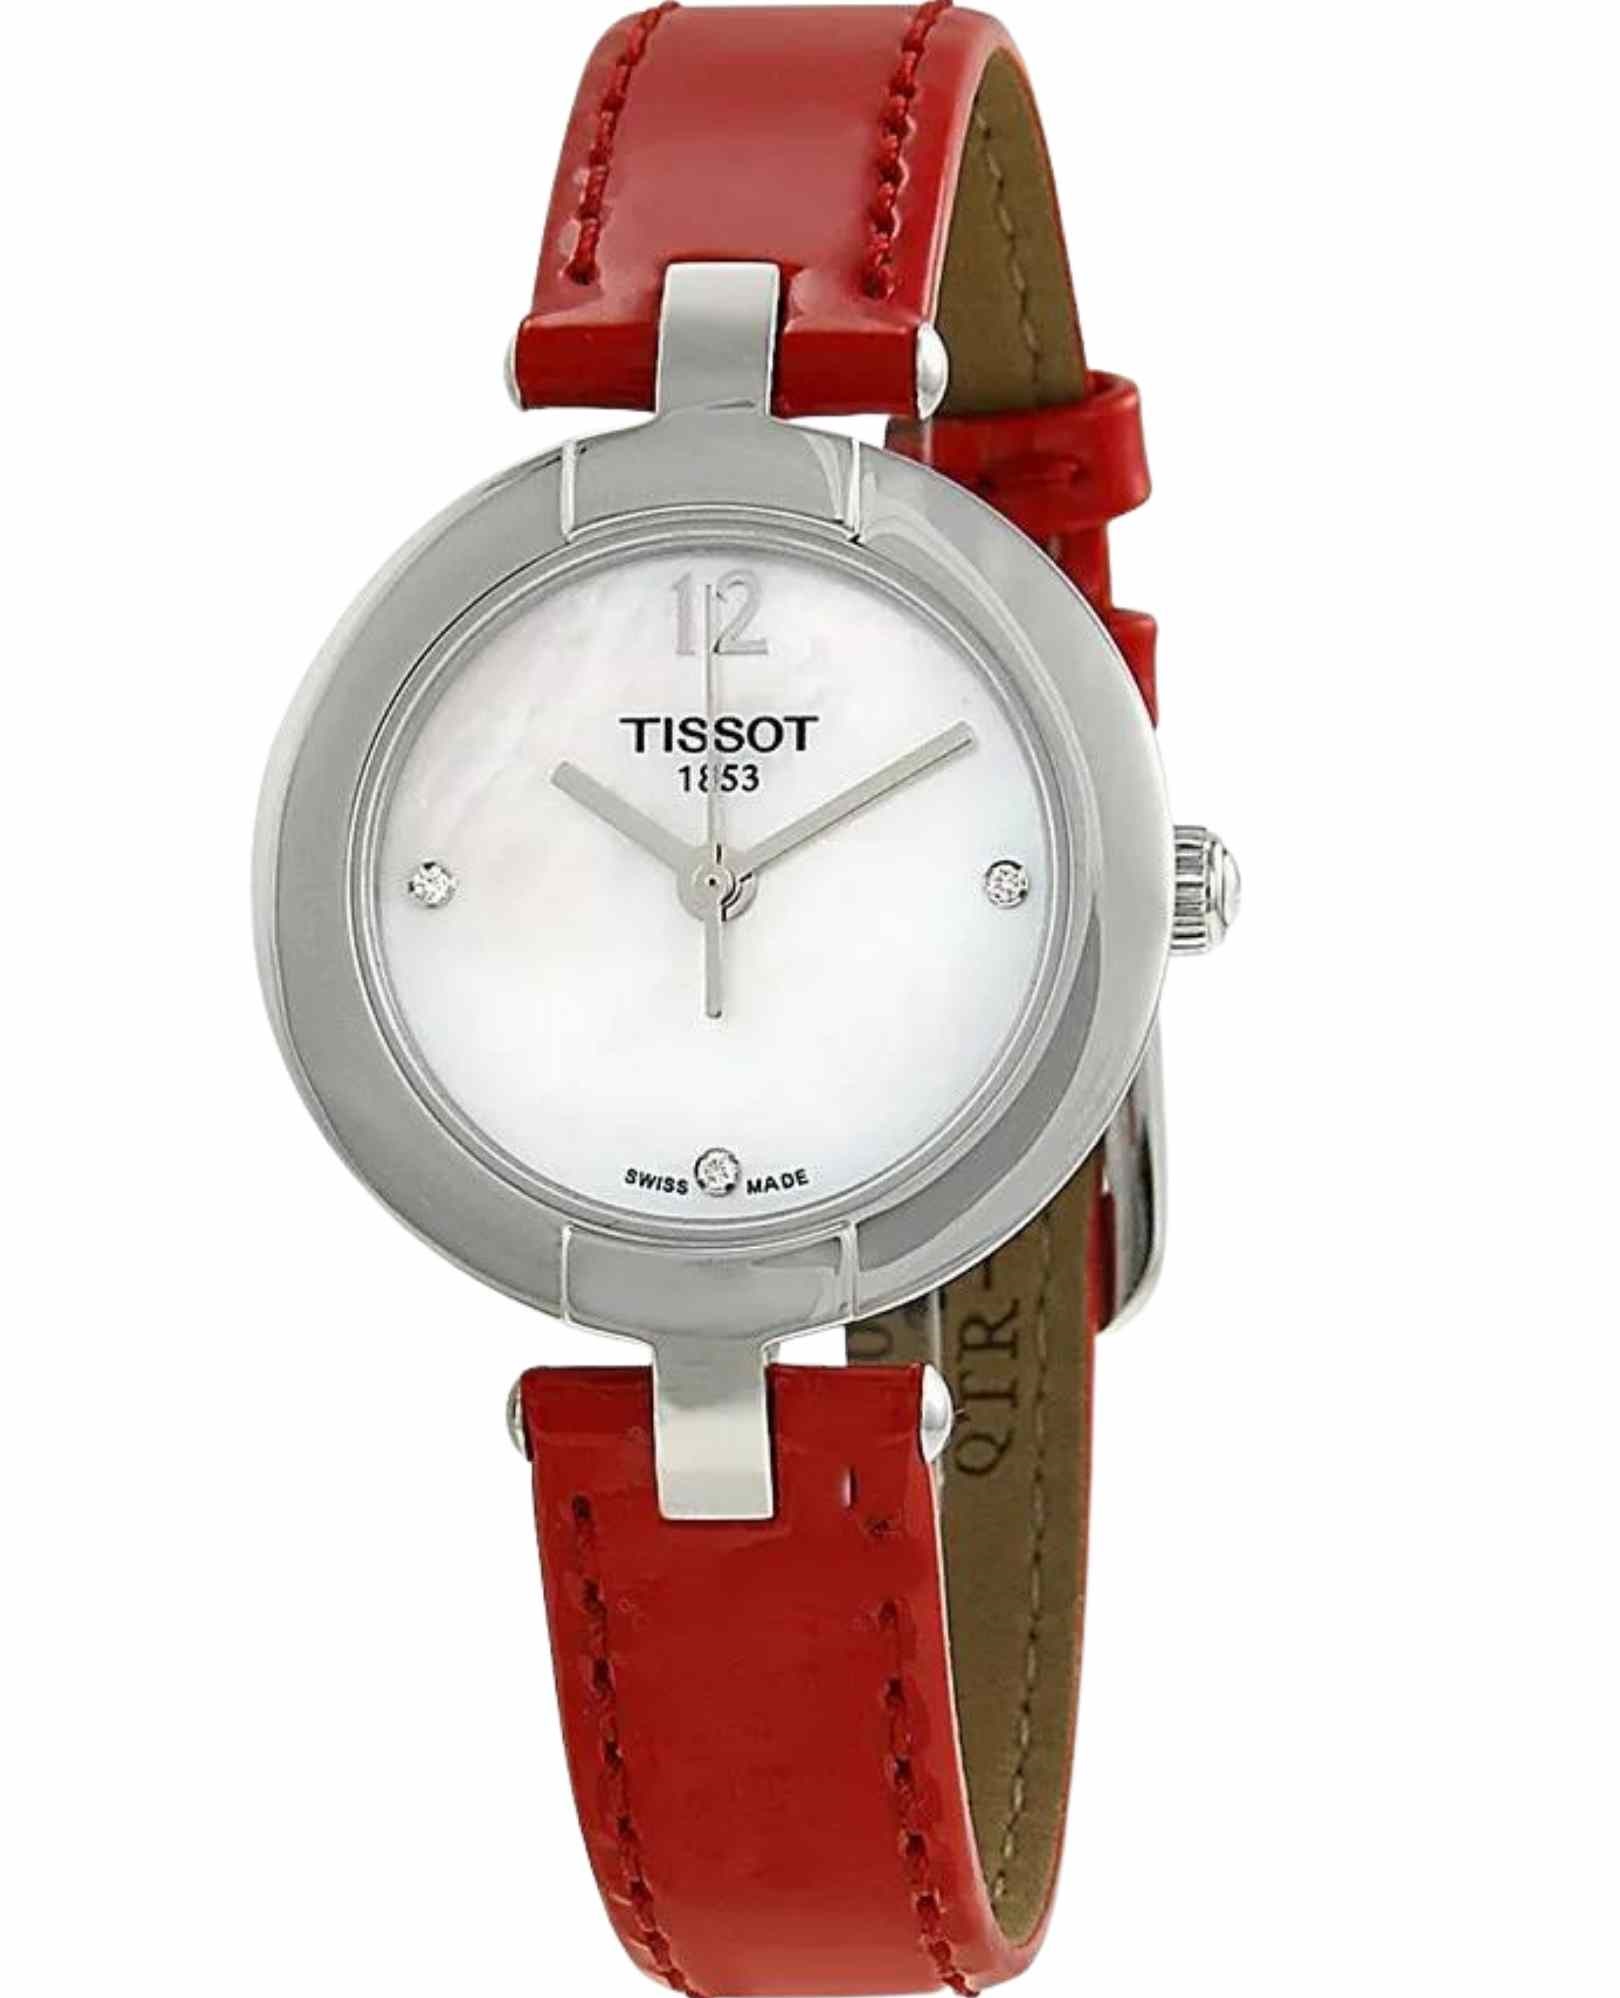 Relógio Tissot T-Trend Pinky Mother of Pearl Dial Diamond T0842101611600